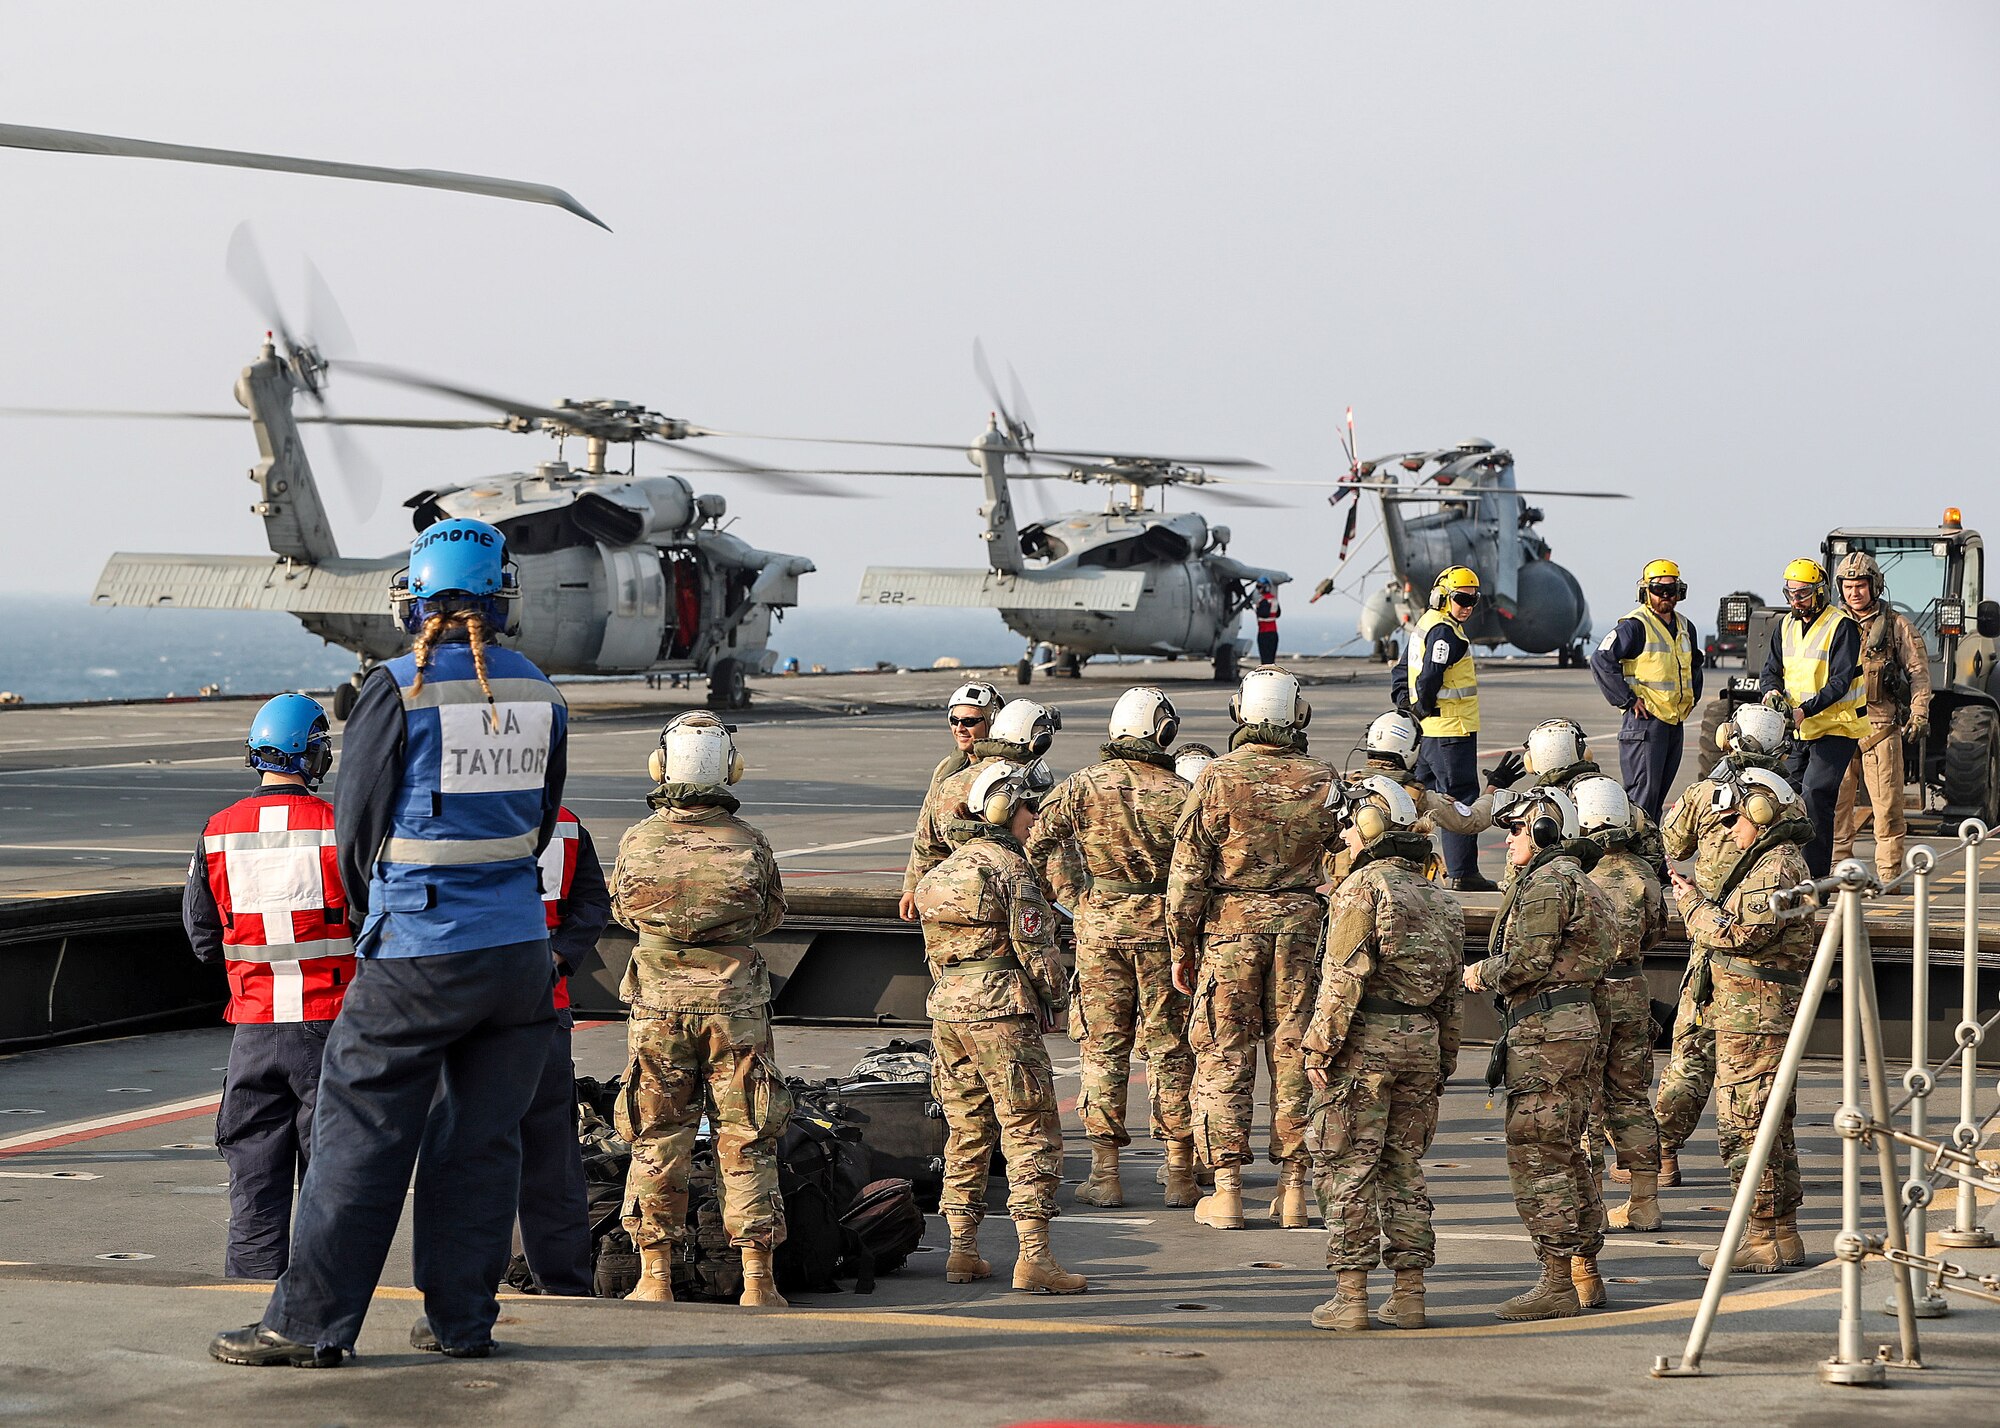 The 379th Expeditionary Medical Operations Squadron mobile field surgical and critical care teams embark on the HMS Ocean via a U.S. Navy SH-60 Sea Hawk helicpoter, Jan. 23, 2017. The MFST-ECCT medical personnel participated in exercise Azraq Serpent, where they joined coalition forces to simulate setting up a role two surgical and critical care facility on a maritime platform. (Courtesy photo, Royal Navy)